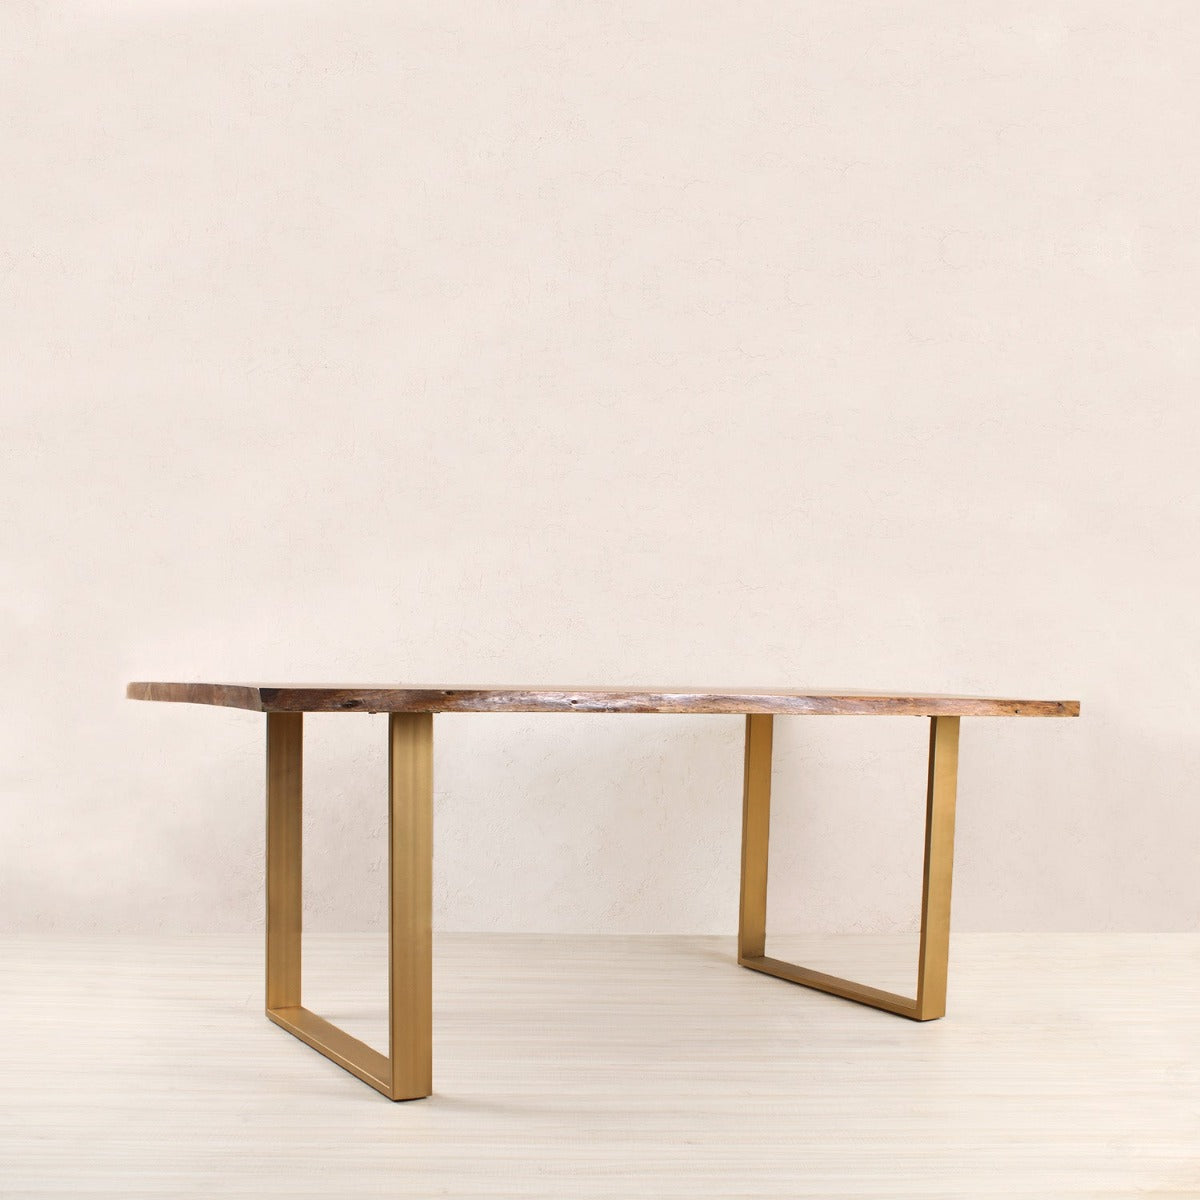 Justa Wooden Dining Table